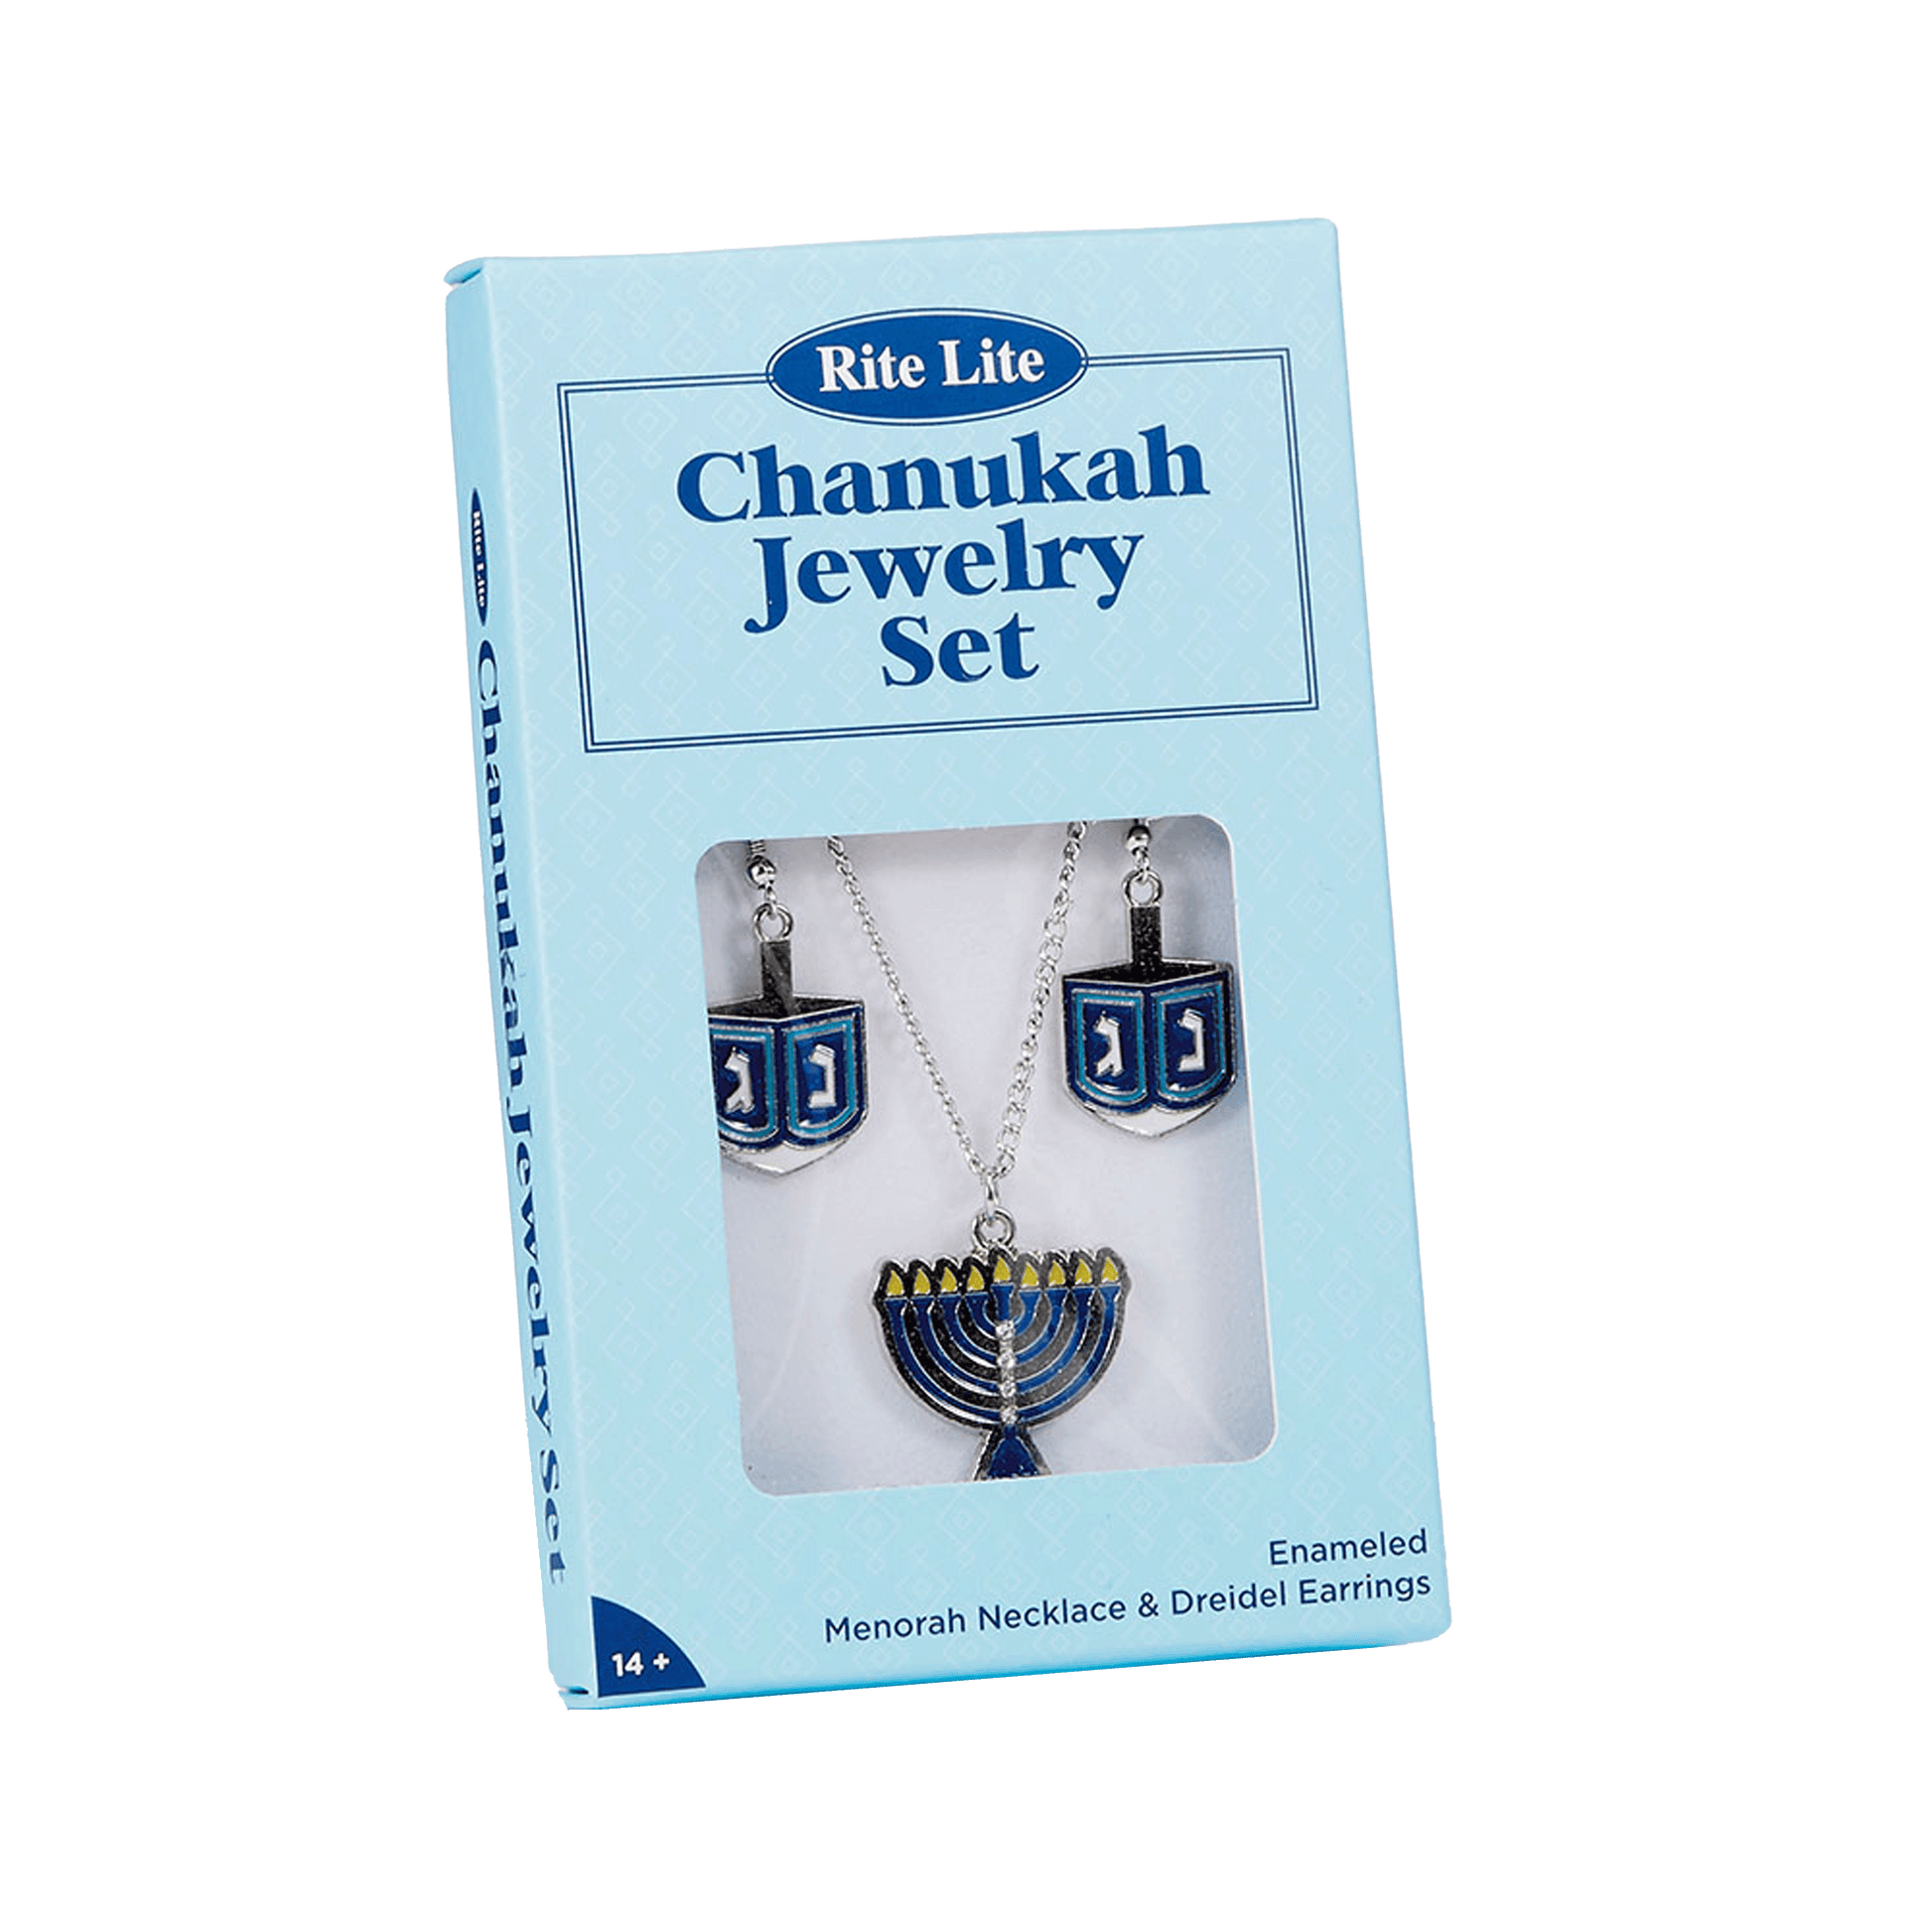 Rite Light Chanukah Jewelry set with two driedle earrings and one menorah necklace 